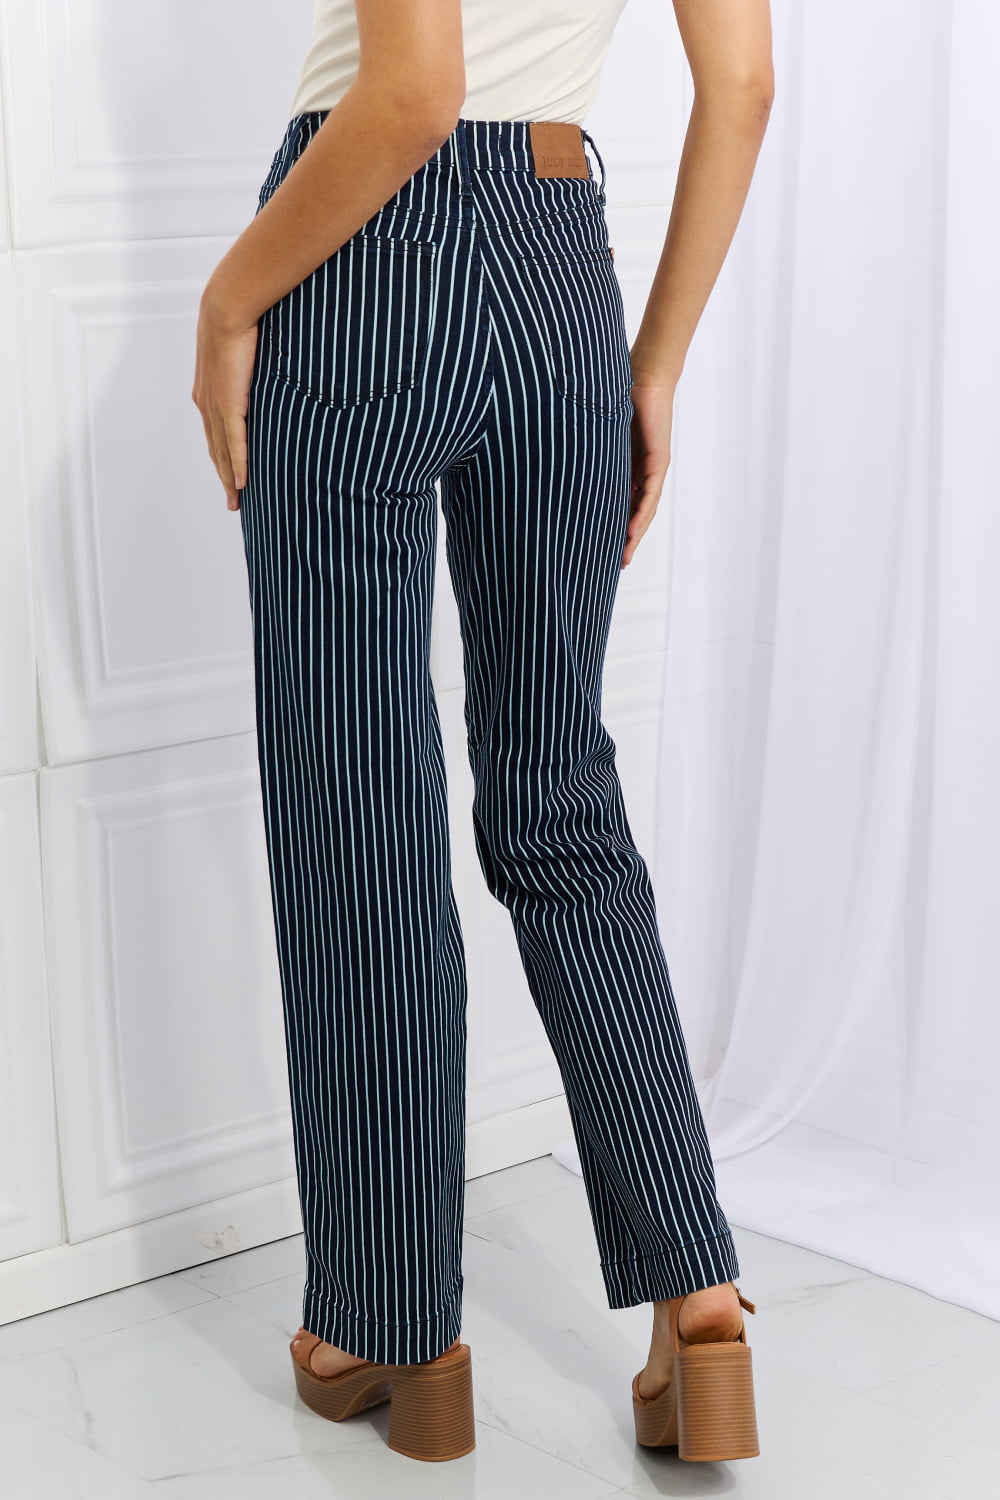 Judy Blue Cassidy Full Size High Waisted Tummy Control Striped Straight Jeans Jeans JT's Designer Fashion